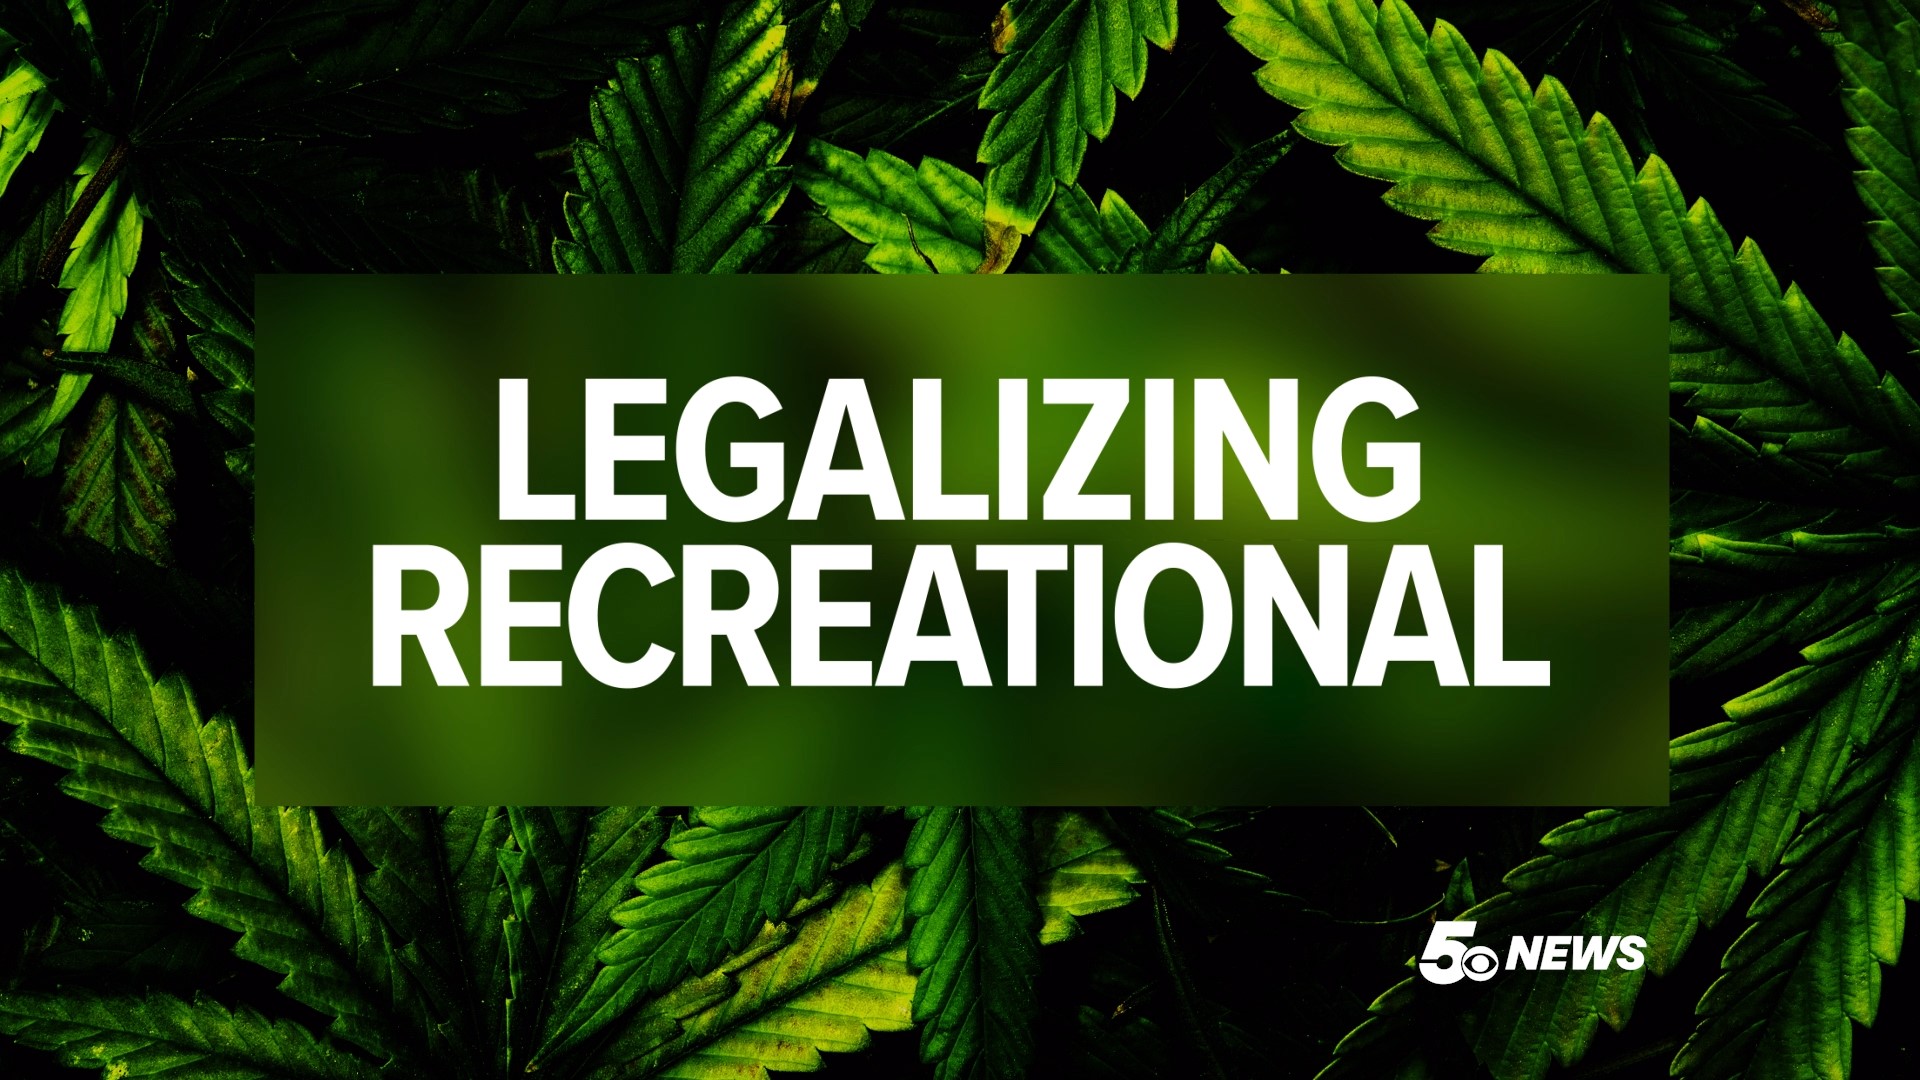 To date, five recreational marijuana petitions have been filed with the Arkansas Secretary of State’s office to be placed on the 2022 ballot.